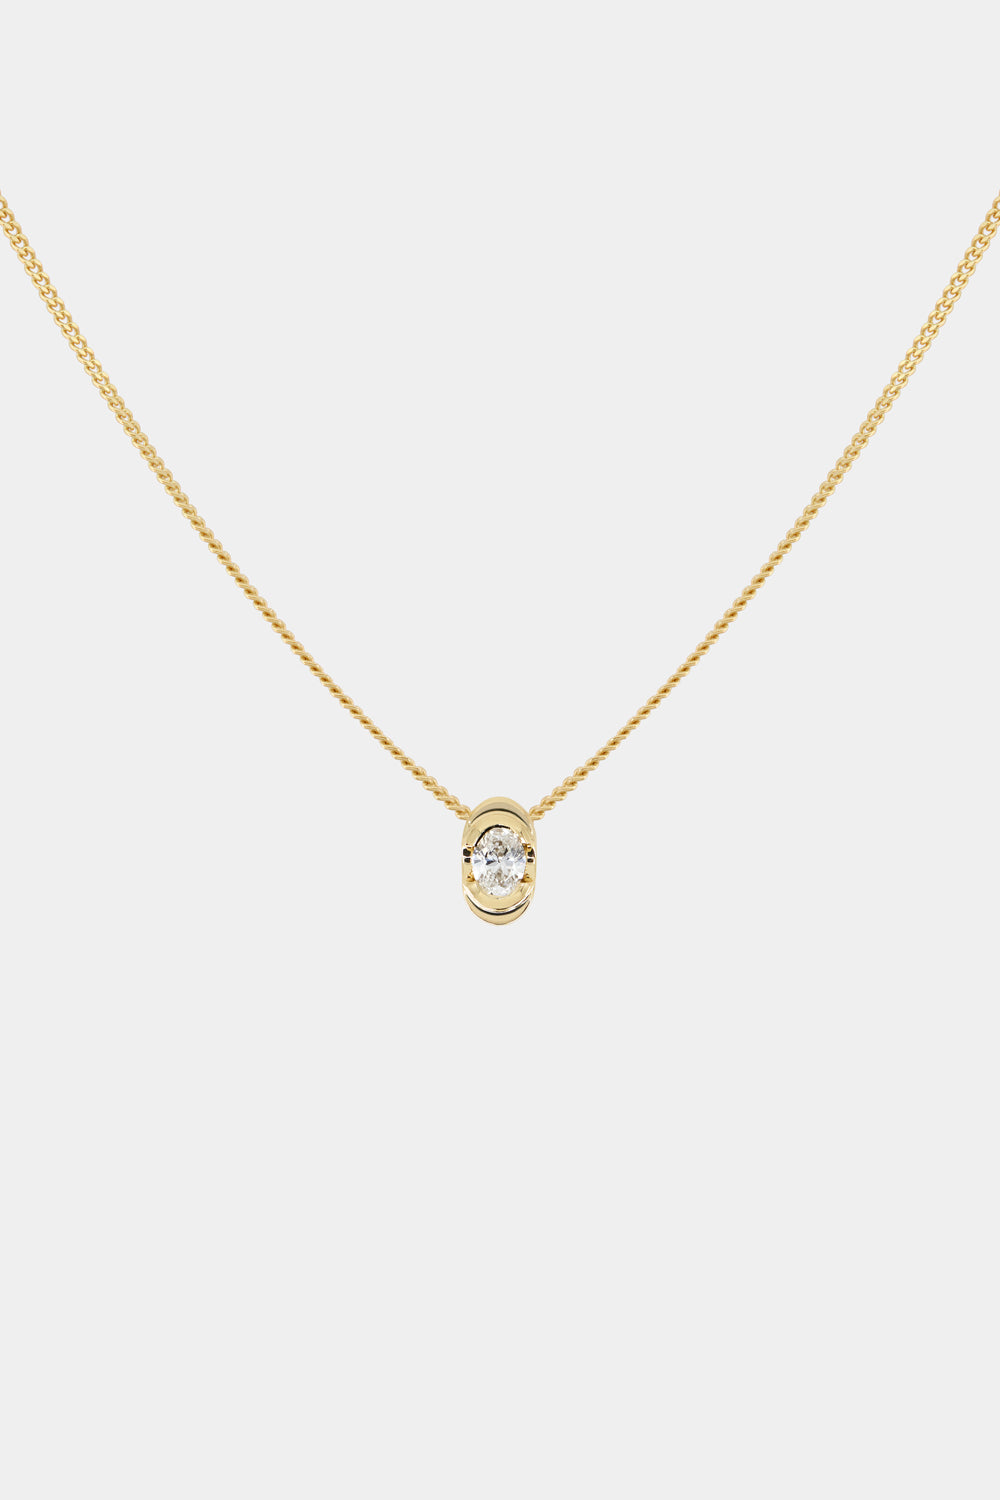 Mini Oval Diamond Necklace | 9K Yellow or Rose Gold, More Options Available